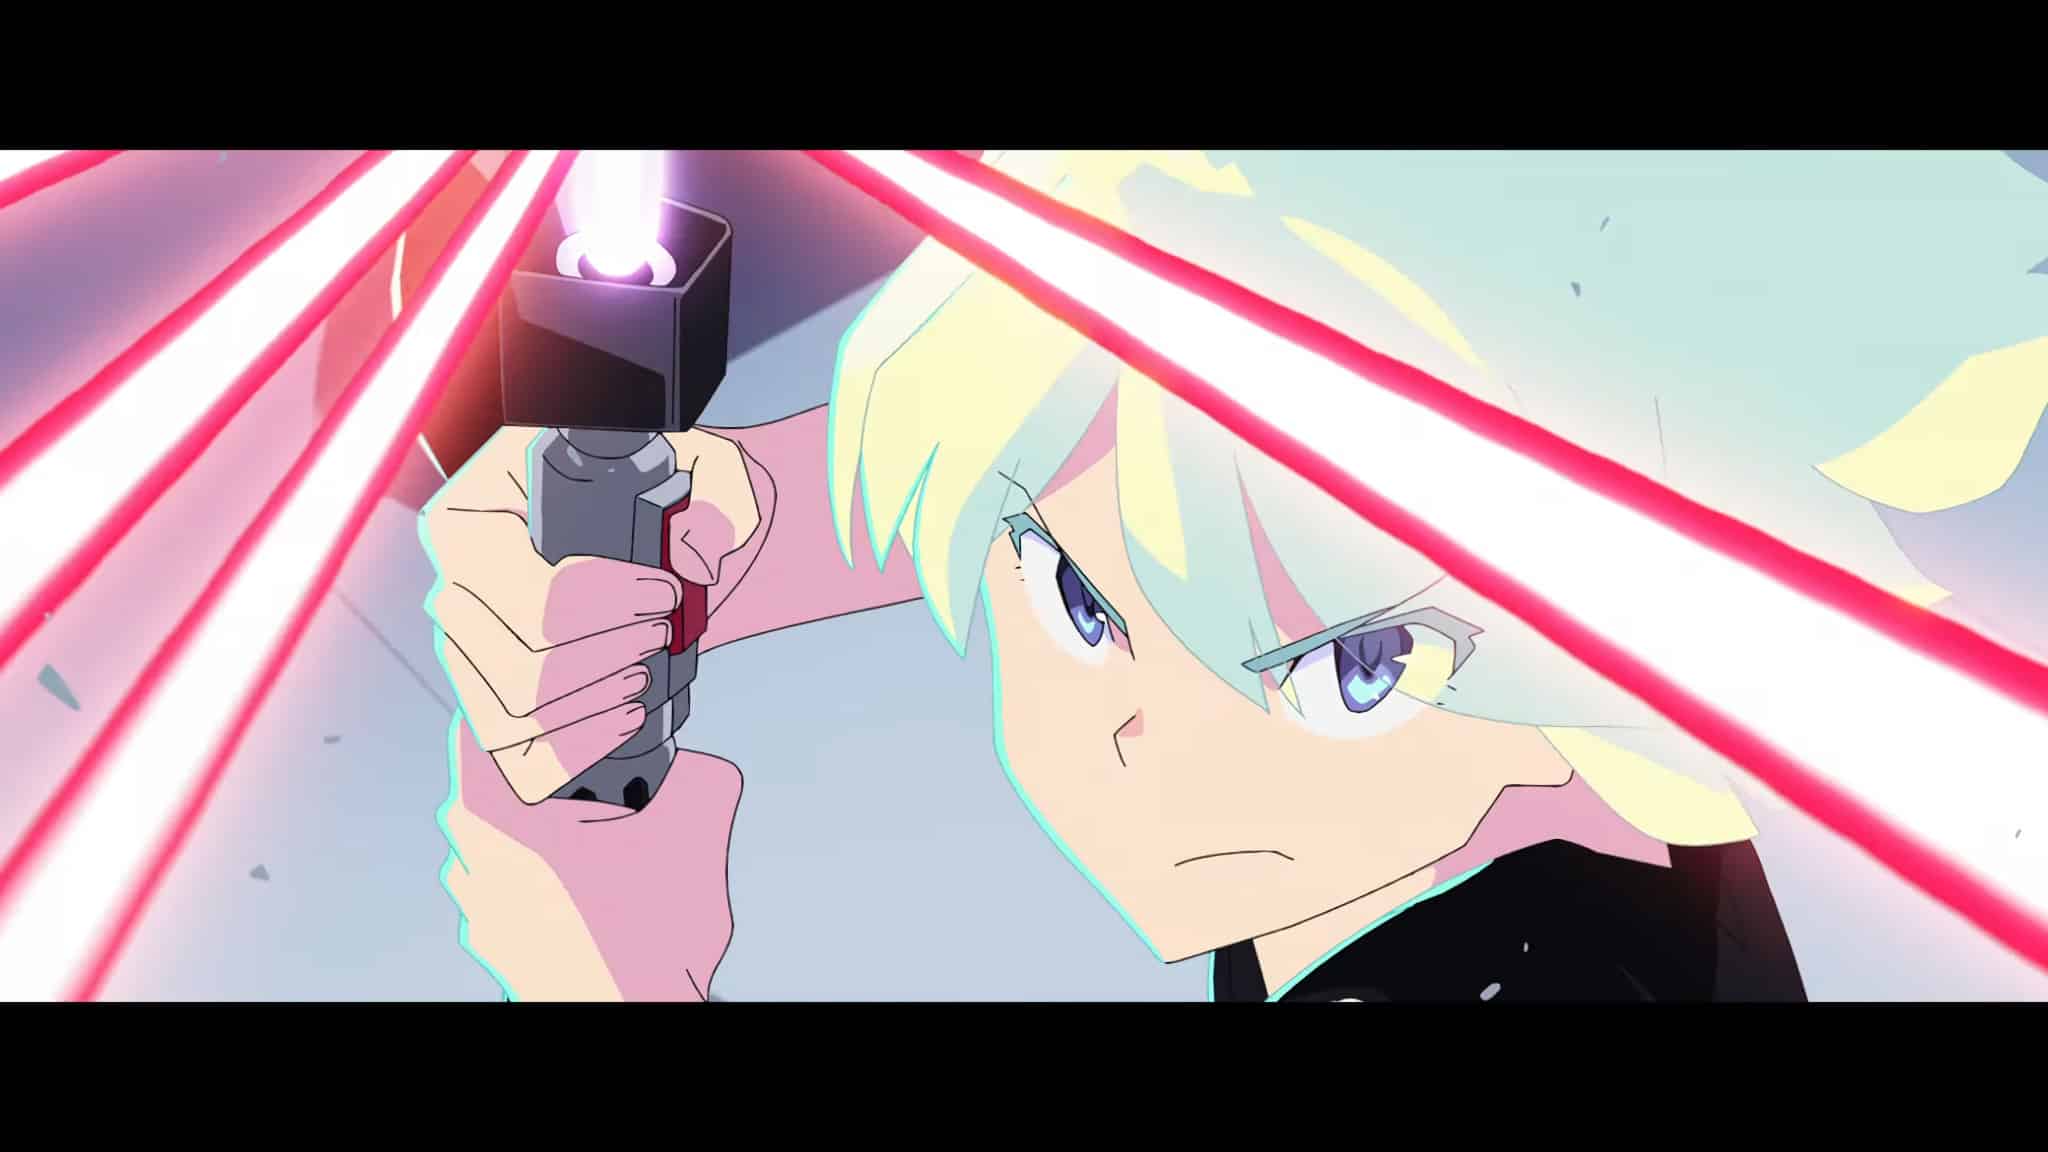 Trailer pour anime STAR WARS VISIONS